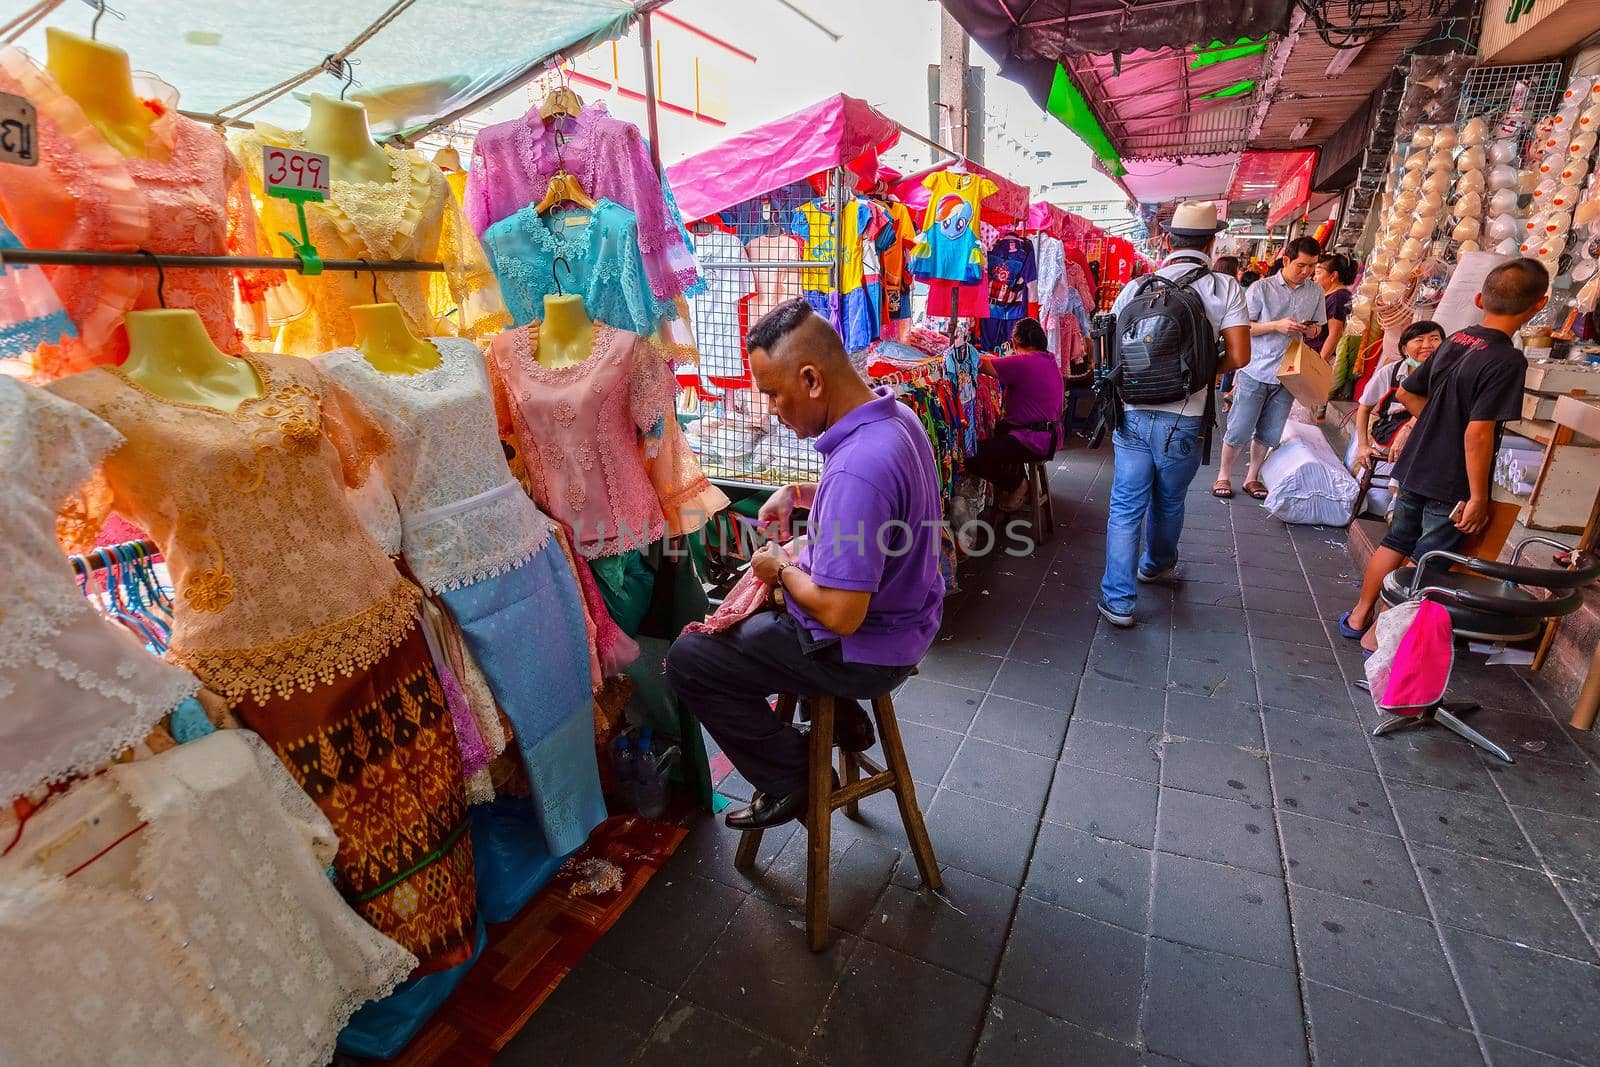 BANGKOK, THAILAND - 22 Dec 2018  : Unidentified people shop at a market in Little India. Little India is an ethnic neighborhood surrounding Phahurat Road